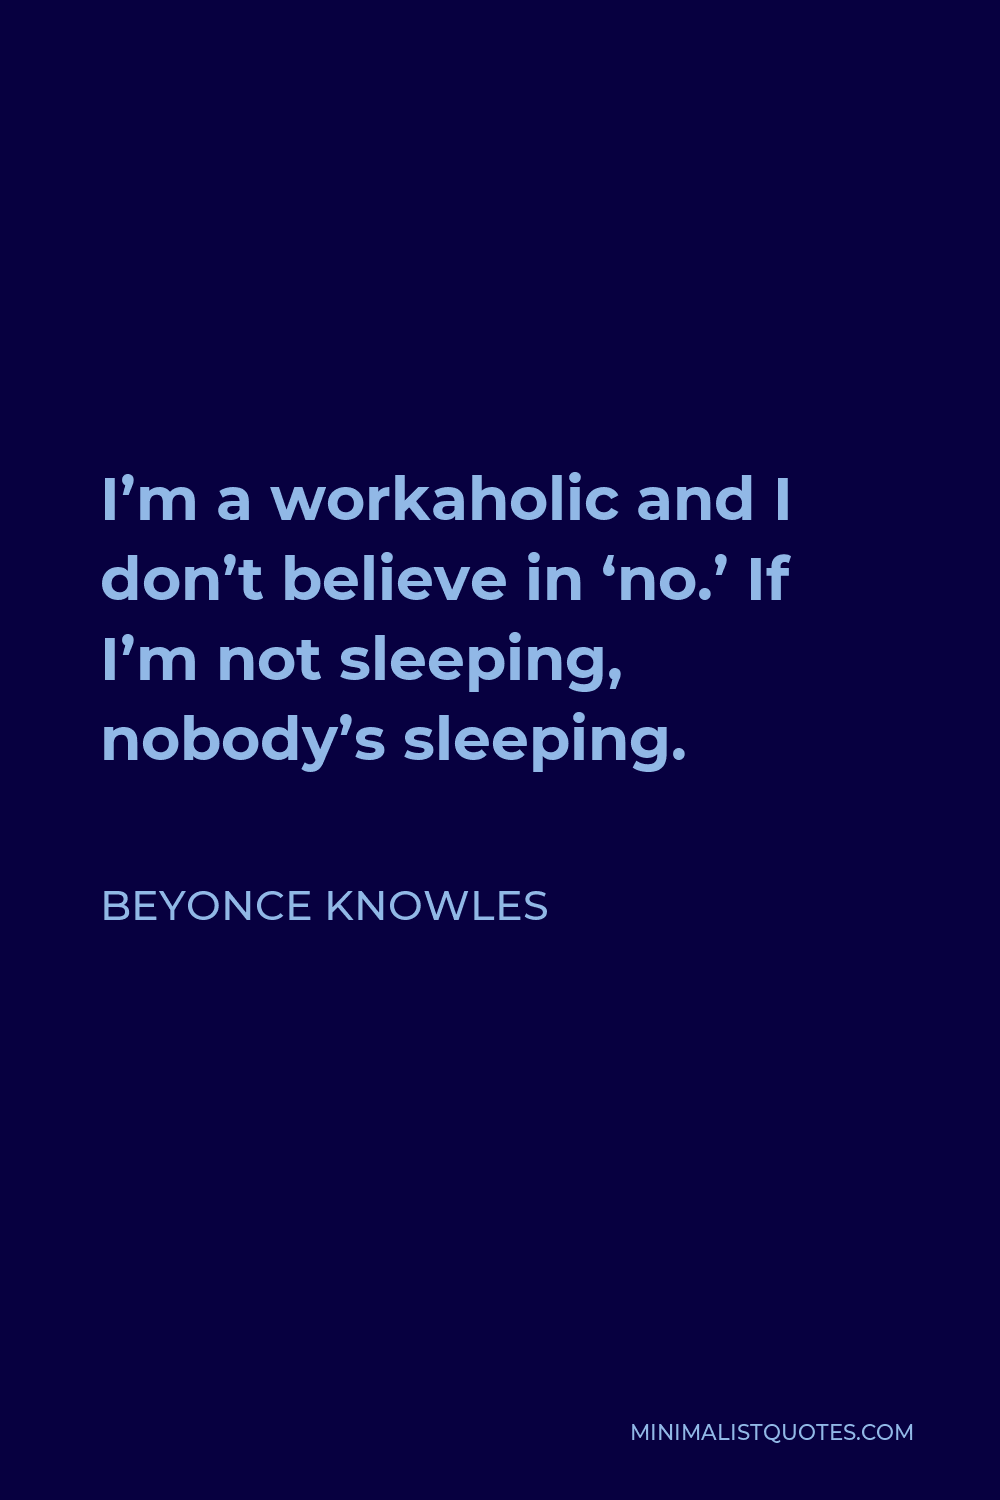 Beyonce Knowles Quote - I’m a workaholic and I don’t believe in ‘no.’ If I’m not sleeping, nobody’s sleeping.